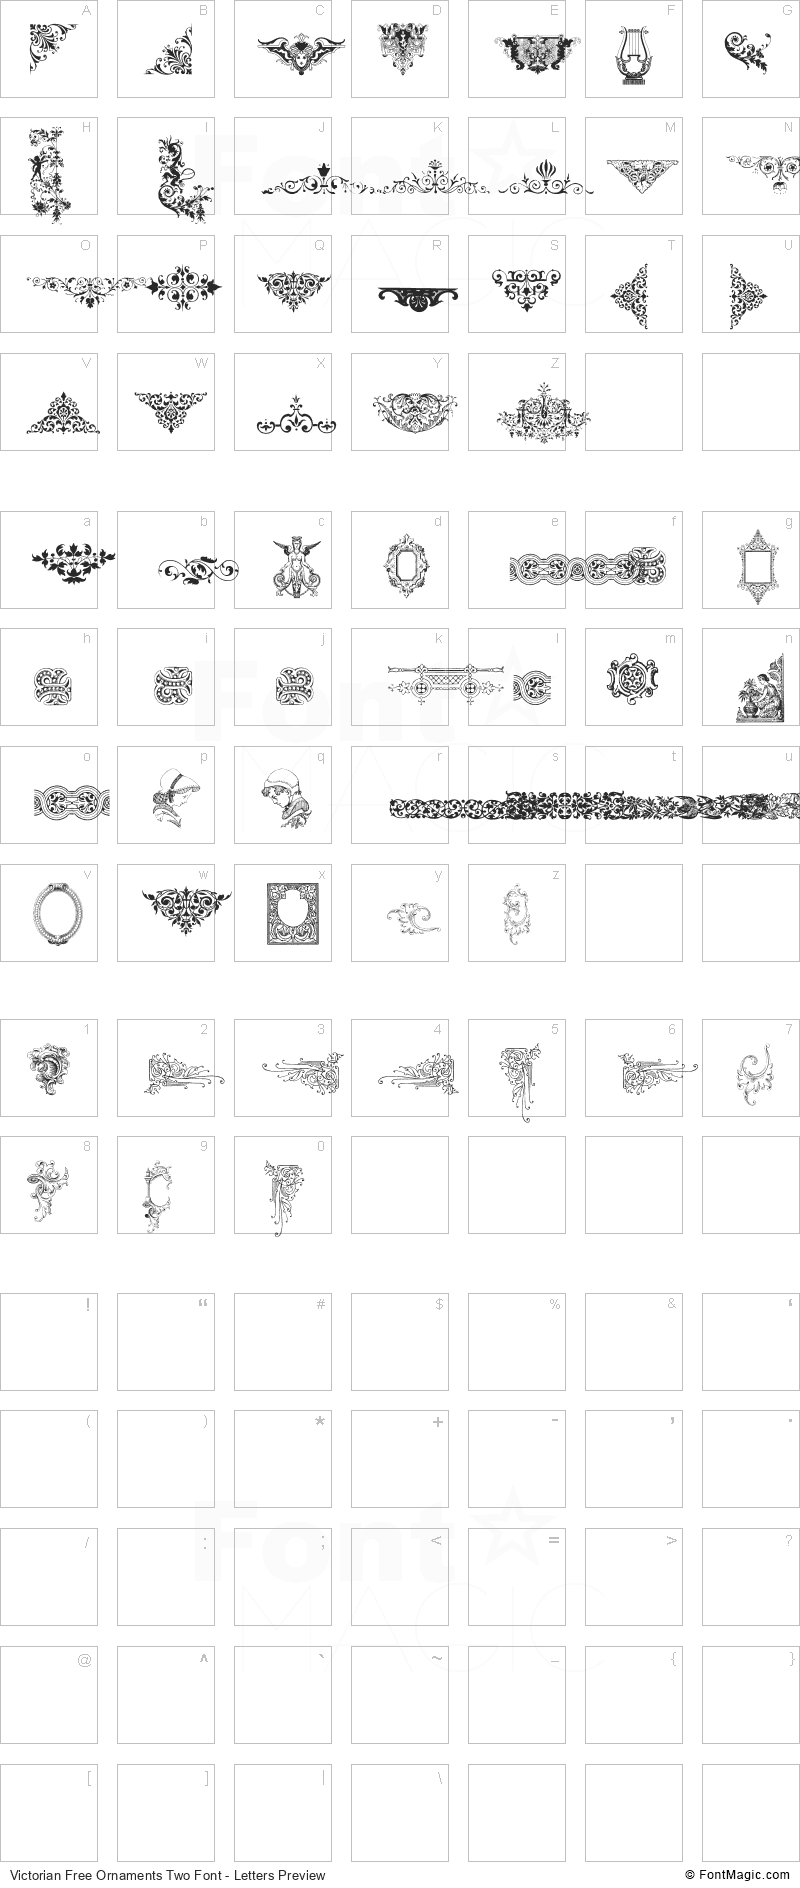 Victorian Free Ornaments Two Font - All Latters Preview Chart